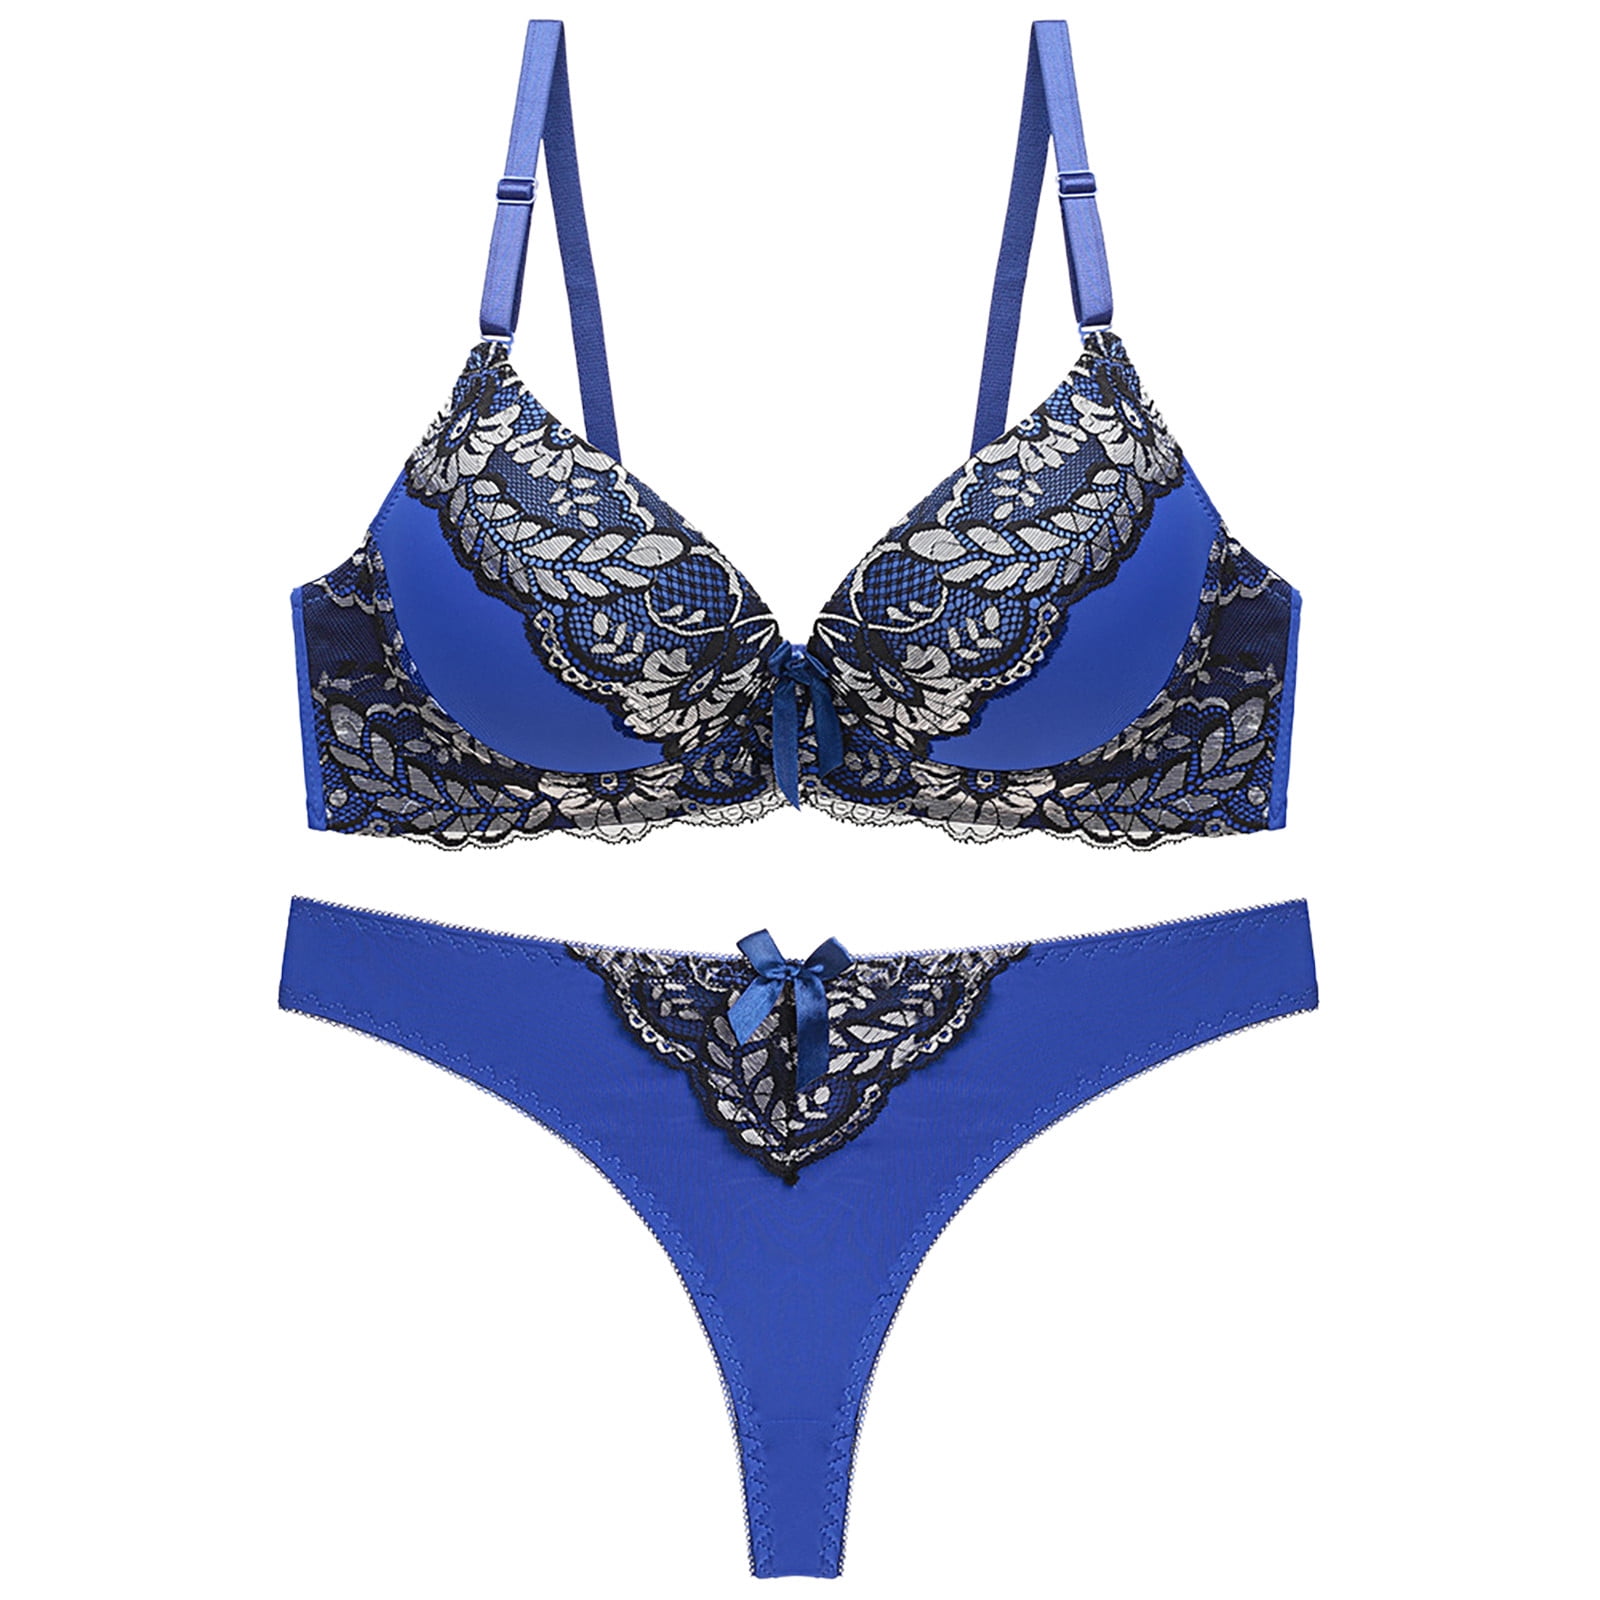 Womens Lace Cotton Embroidered Push Up Bra And Panty Set, Plus Size Lingerie  Set Q0705 From Sihuai03, $10.64